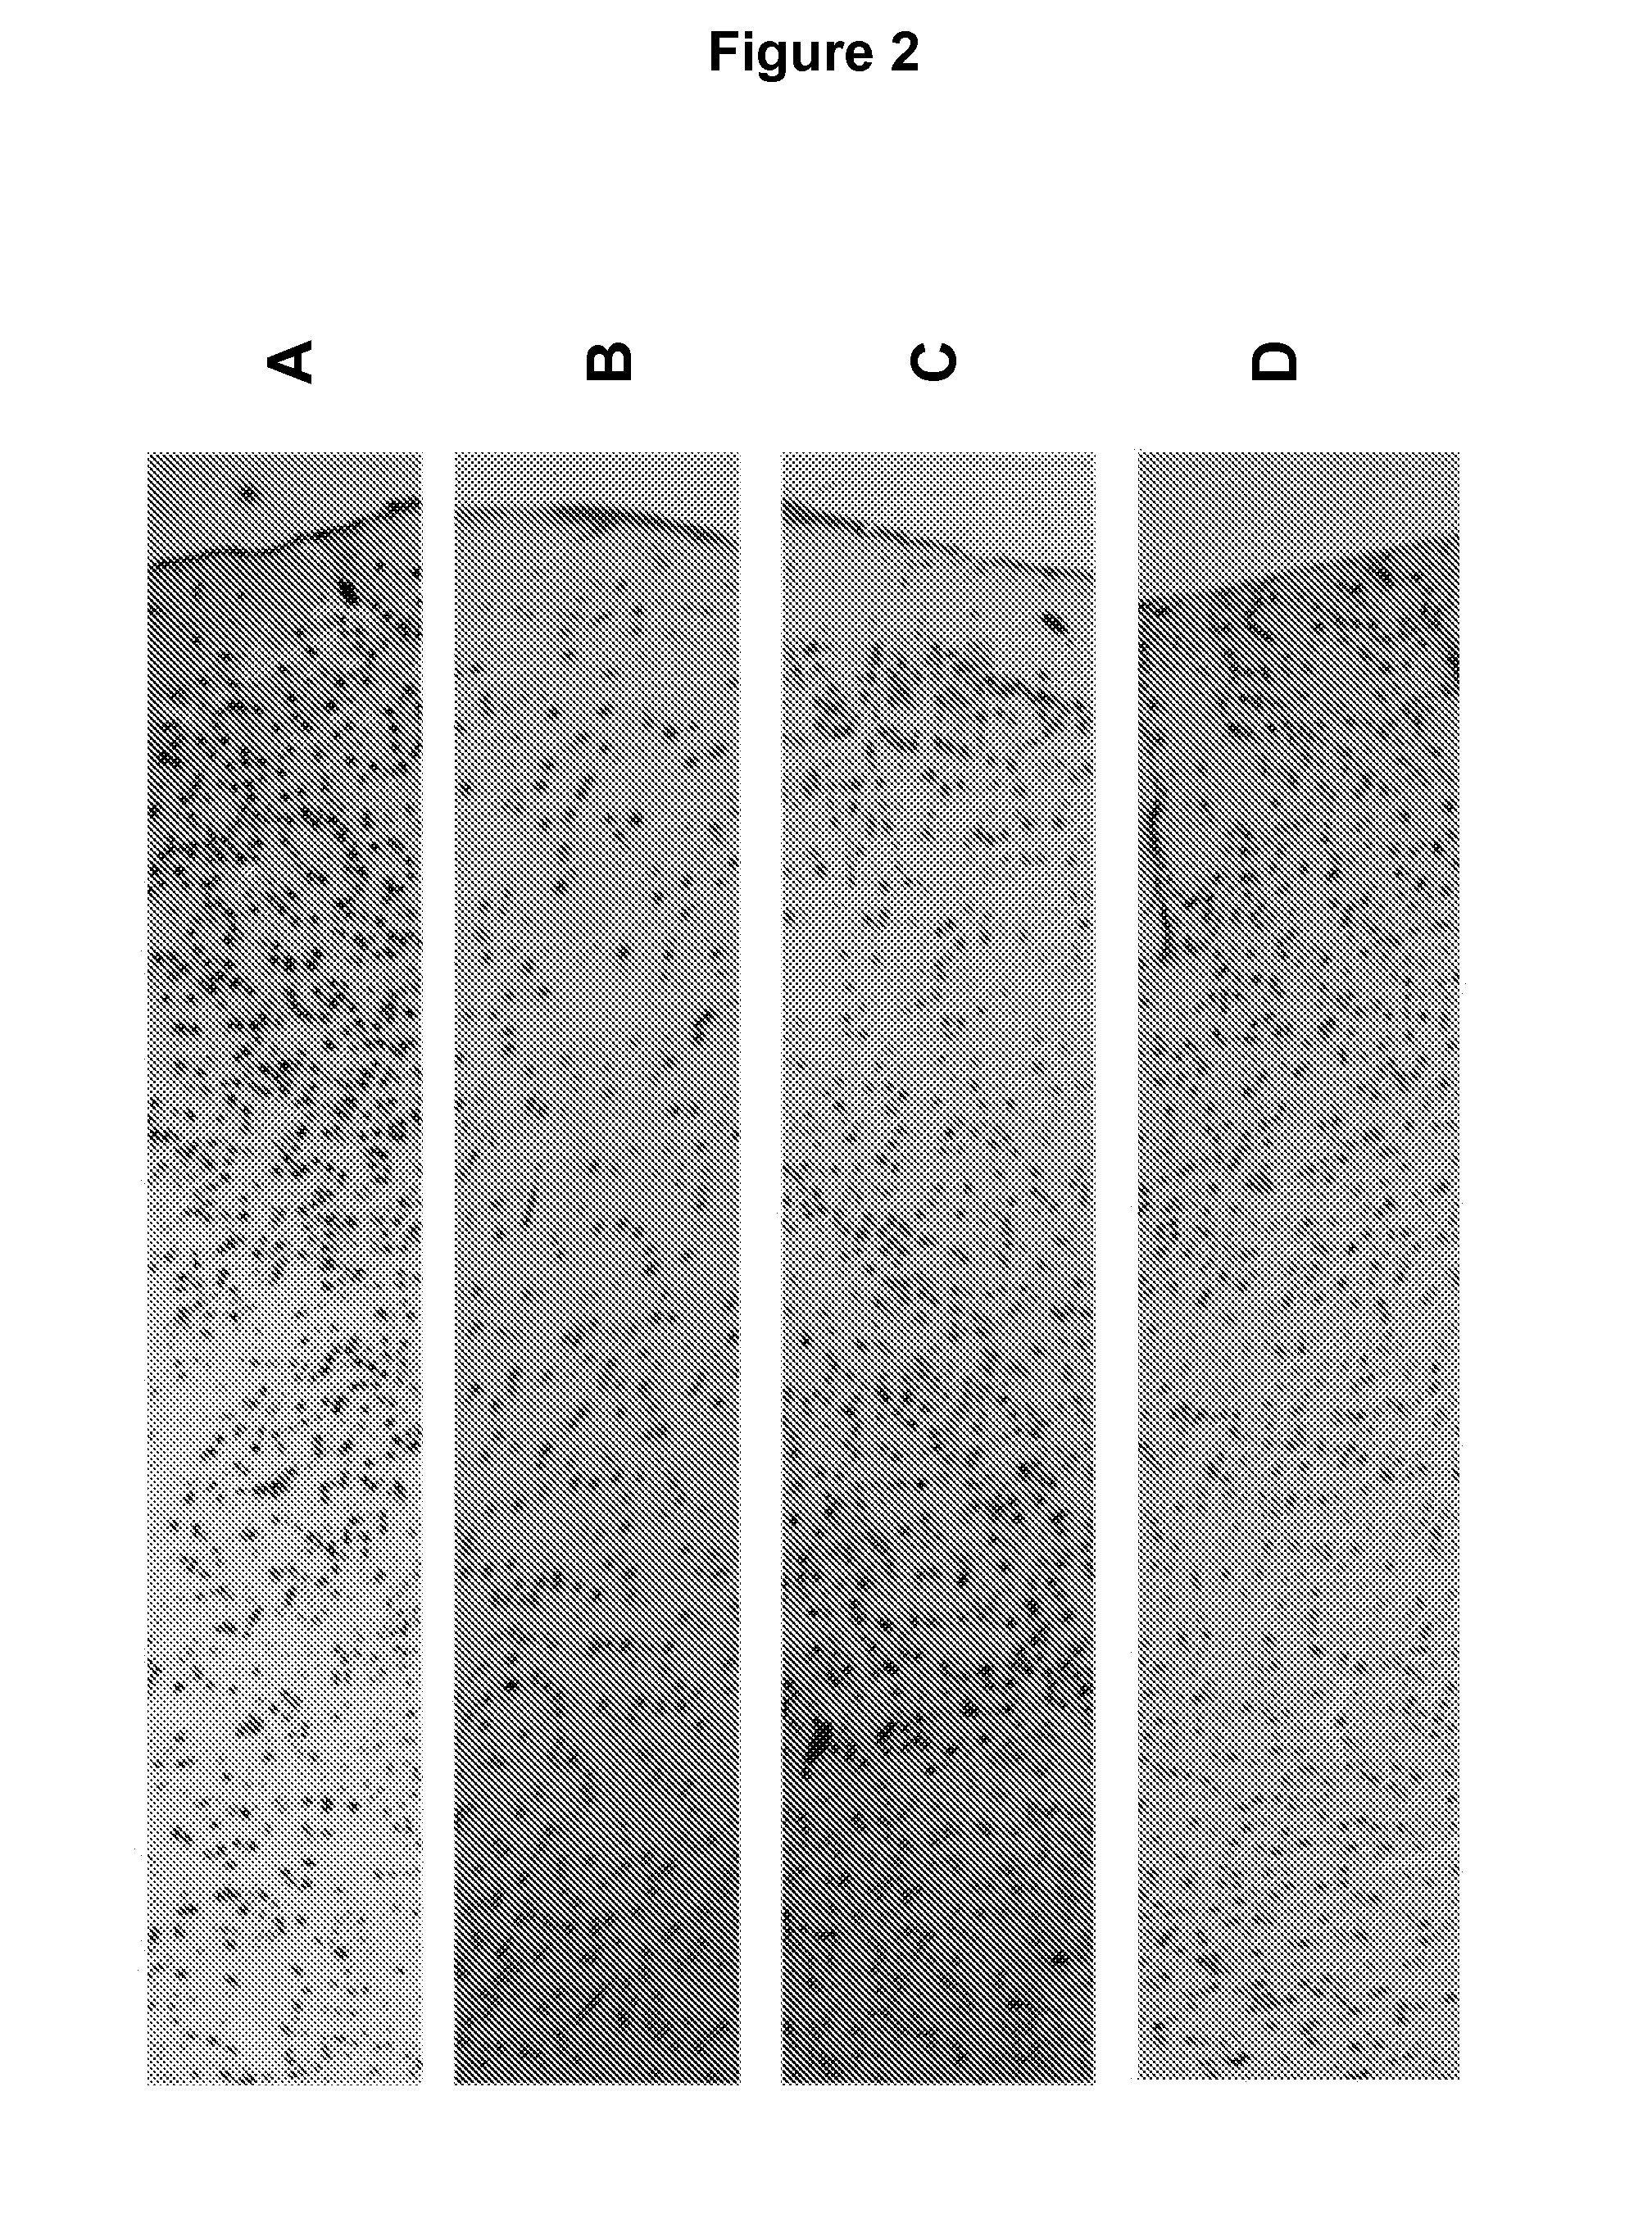 Stabilization method for biological samples by combination of heating and chemical fixation